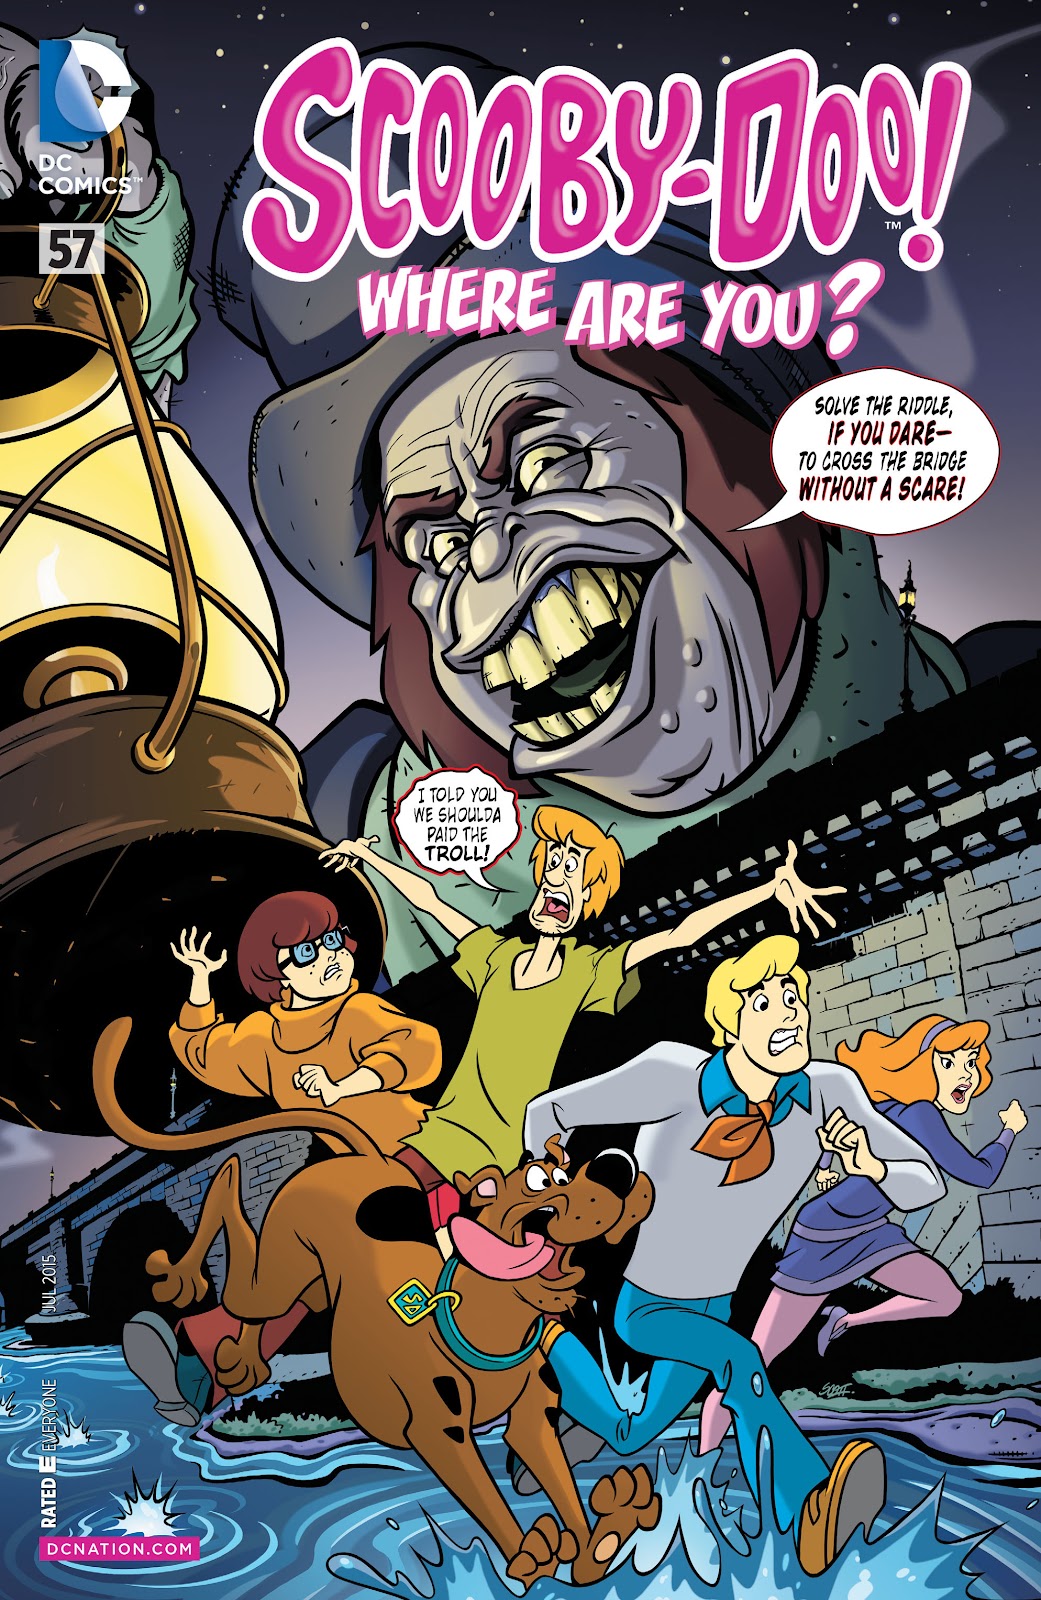 Scooby-Doo: Where Are You? issue 57 - Page 1